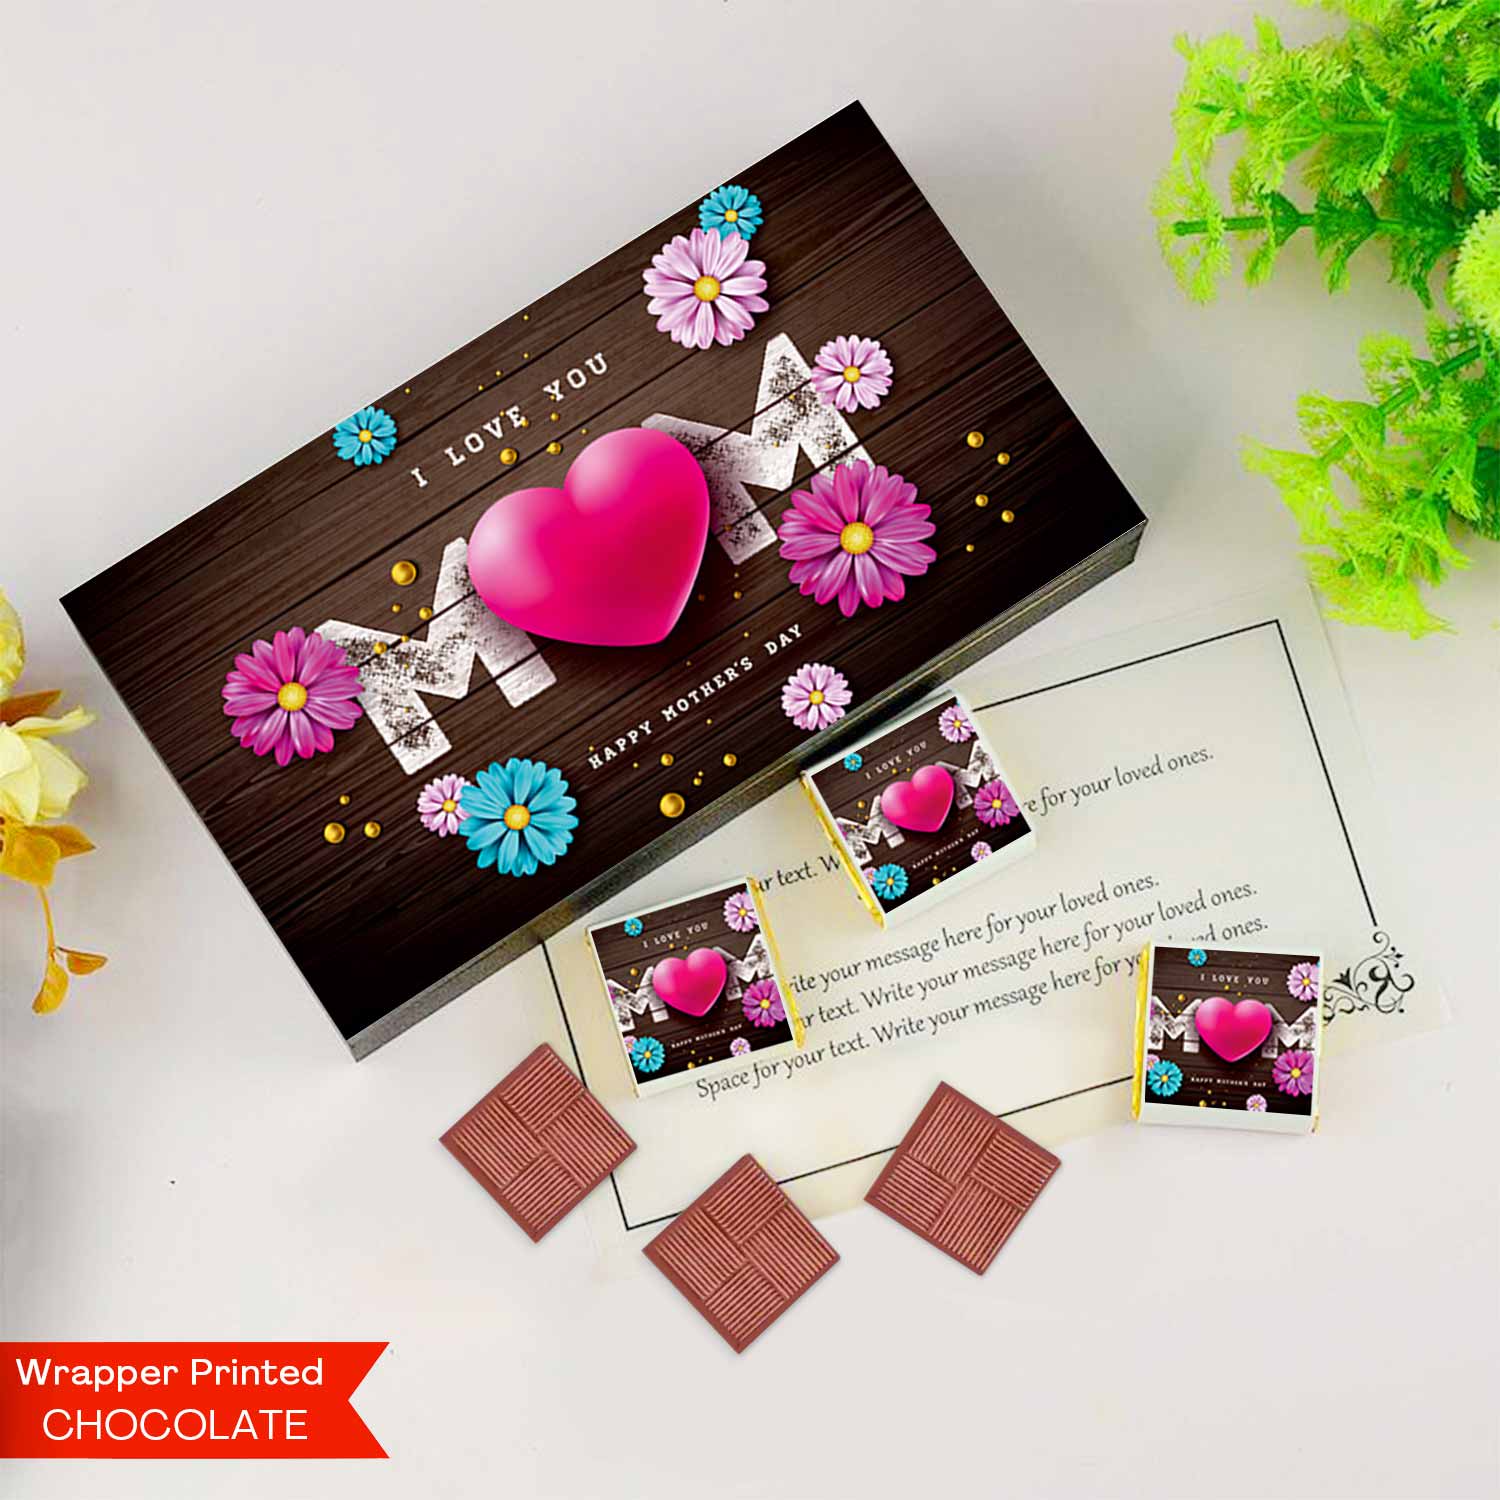 Best Mom Printed wrapper chocolates with Box